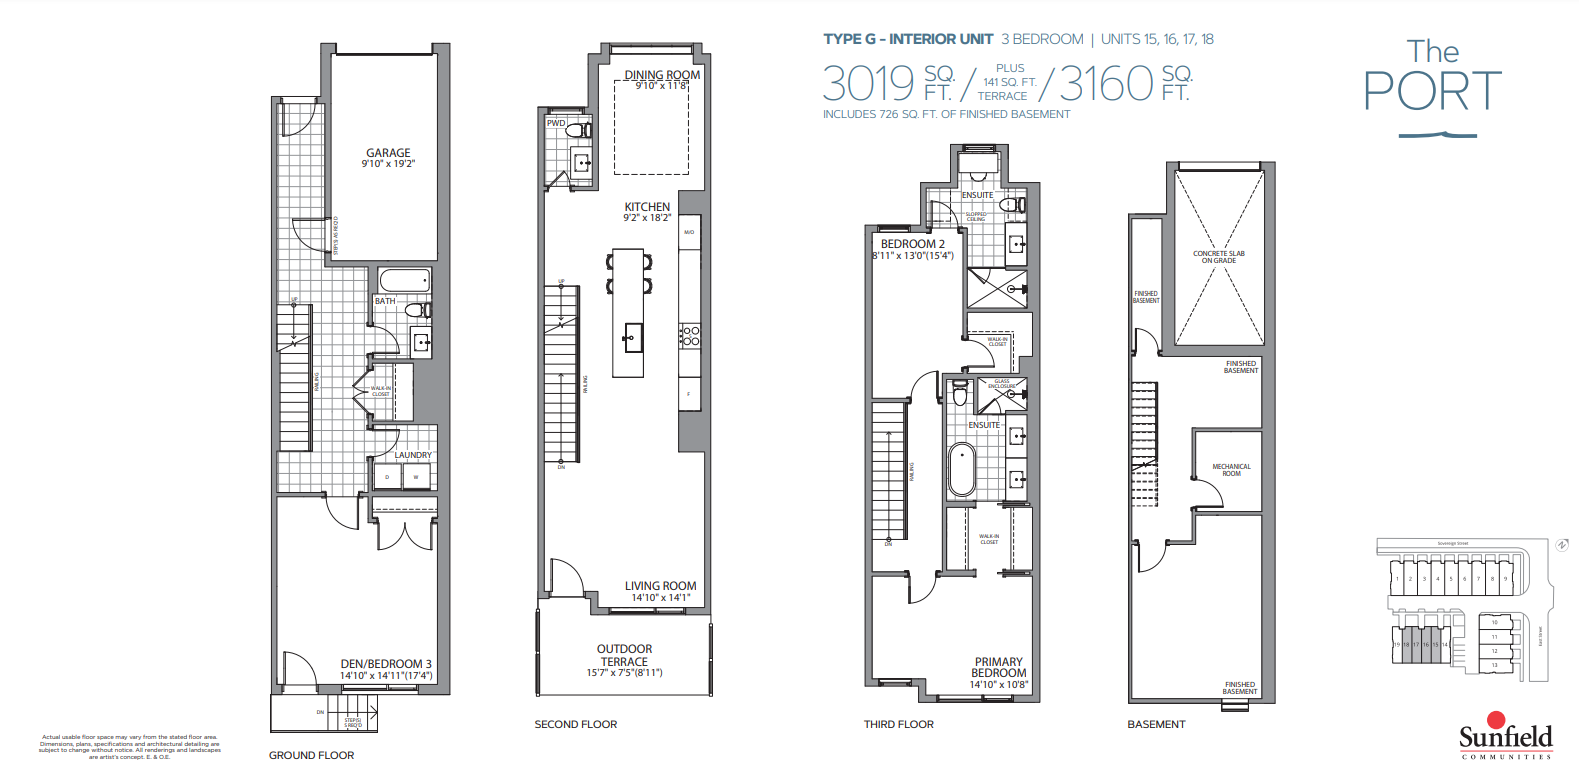  Floor Plan of Shore Club Towns with undefined beds